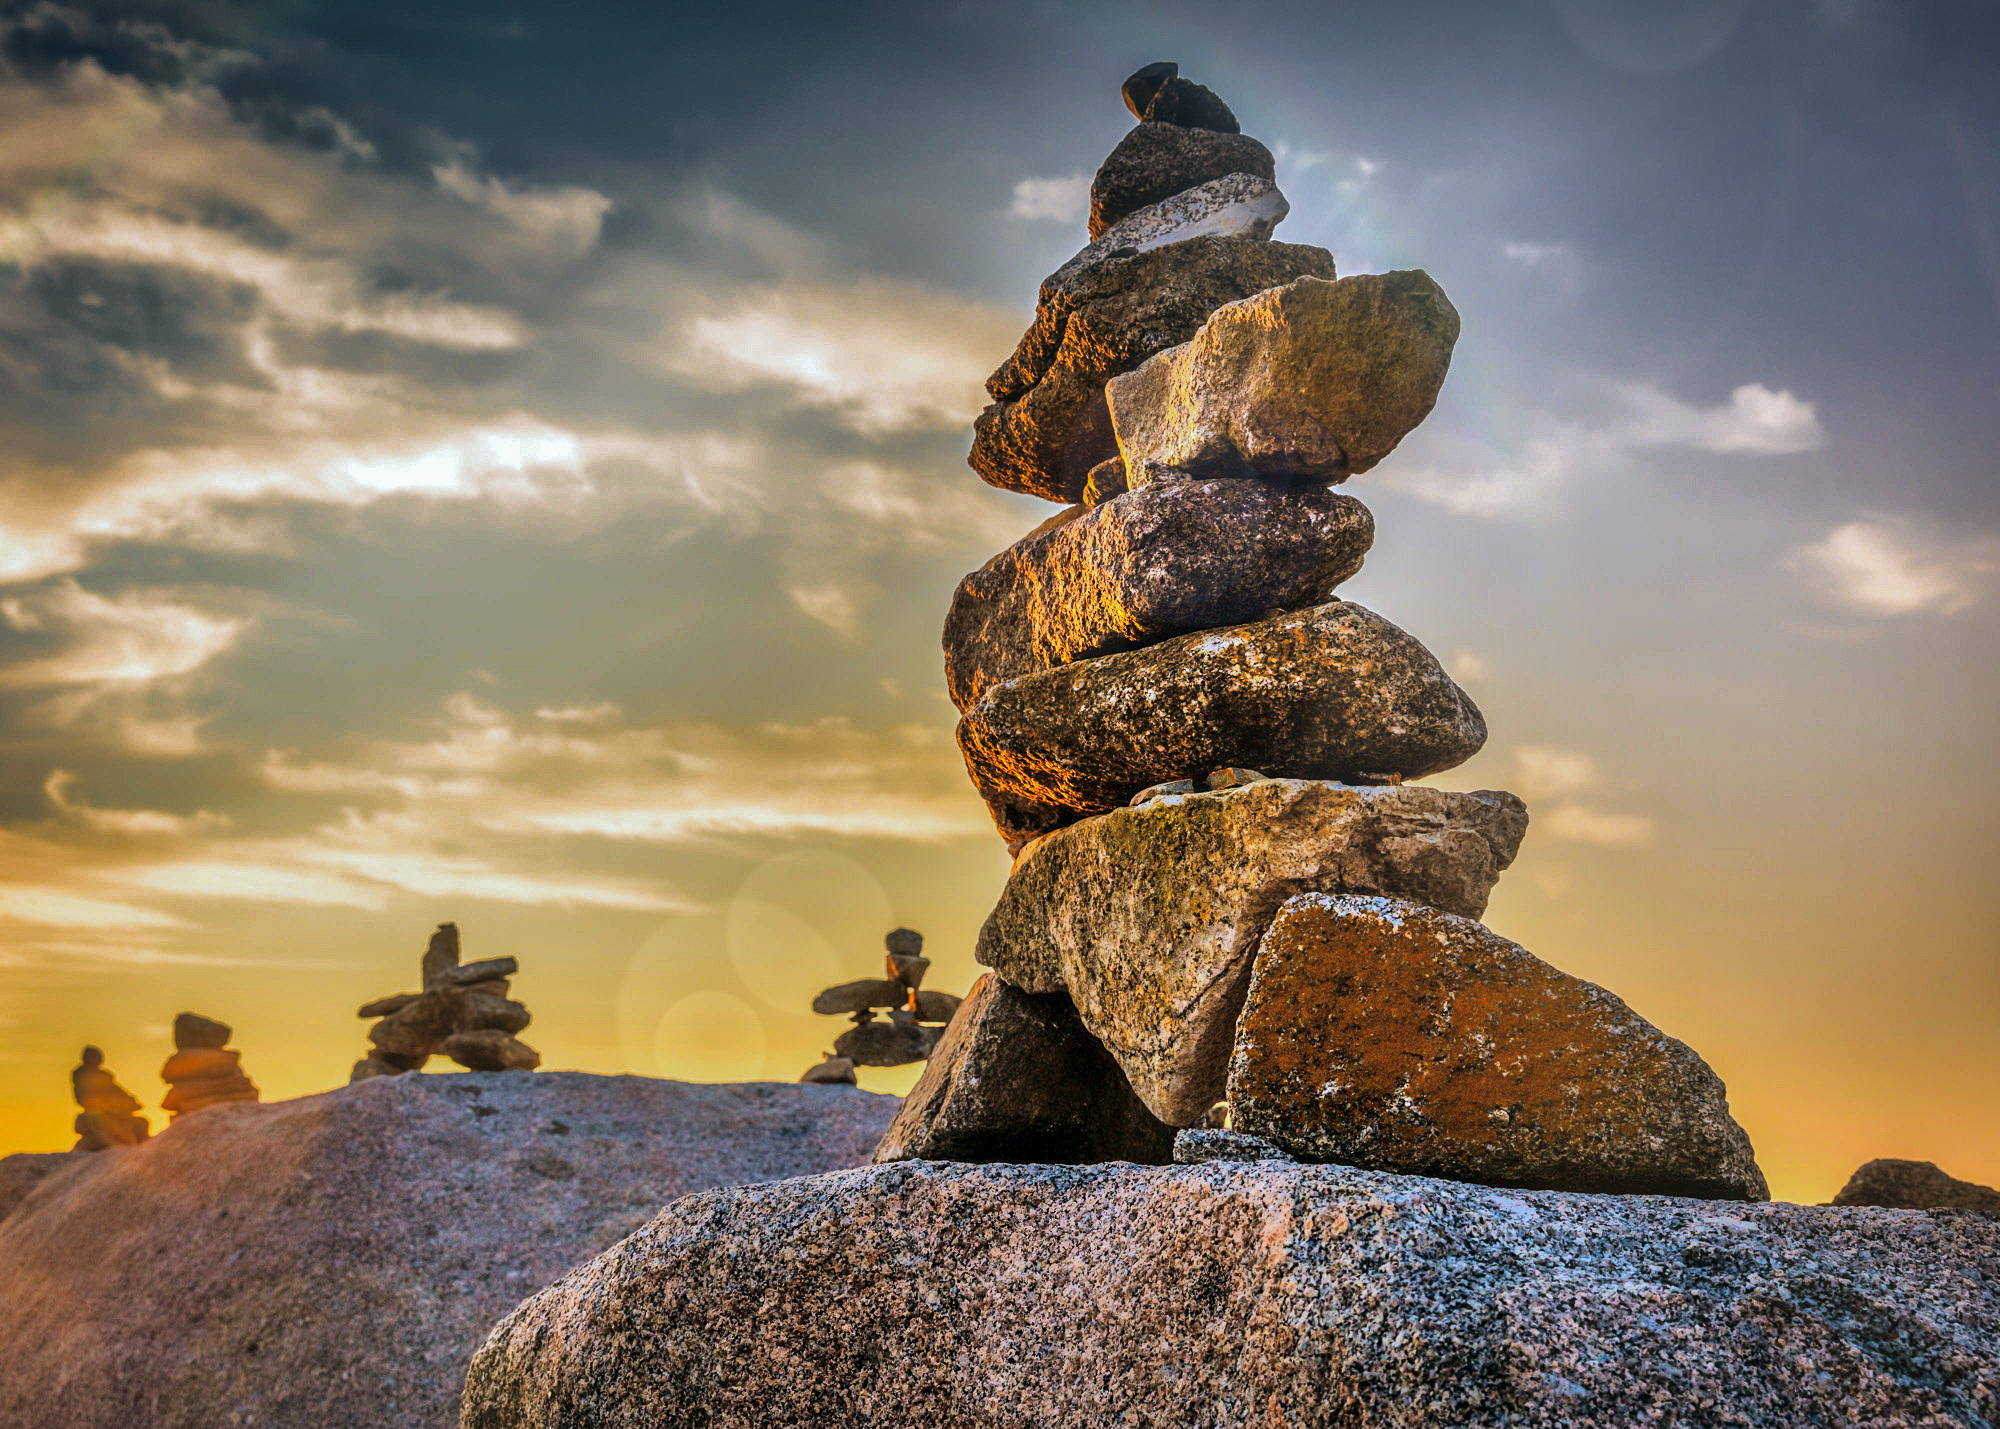 PH5VE training, workshops and conference speaking - Building meaning. A foundation that holds up any ambition. Above and beyond (Inuksuk Canada Peggy Cove)